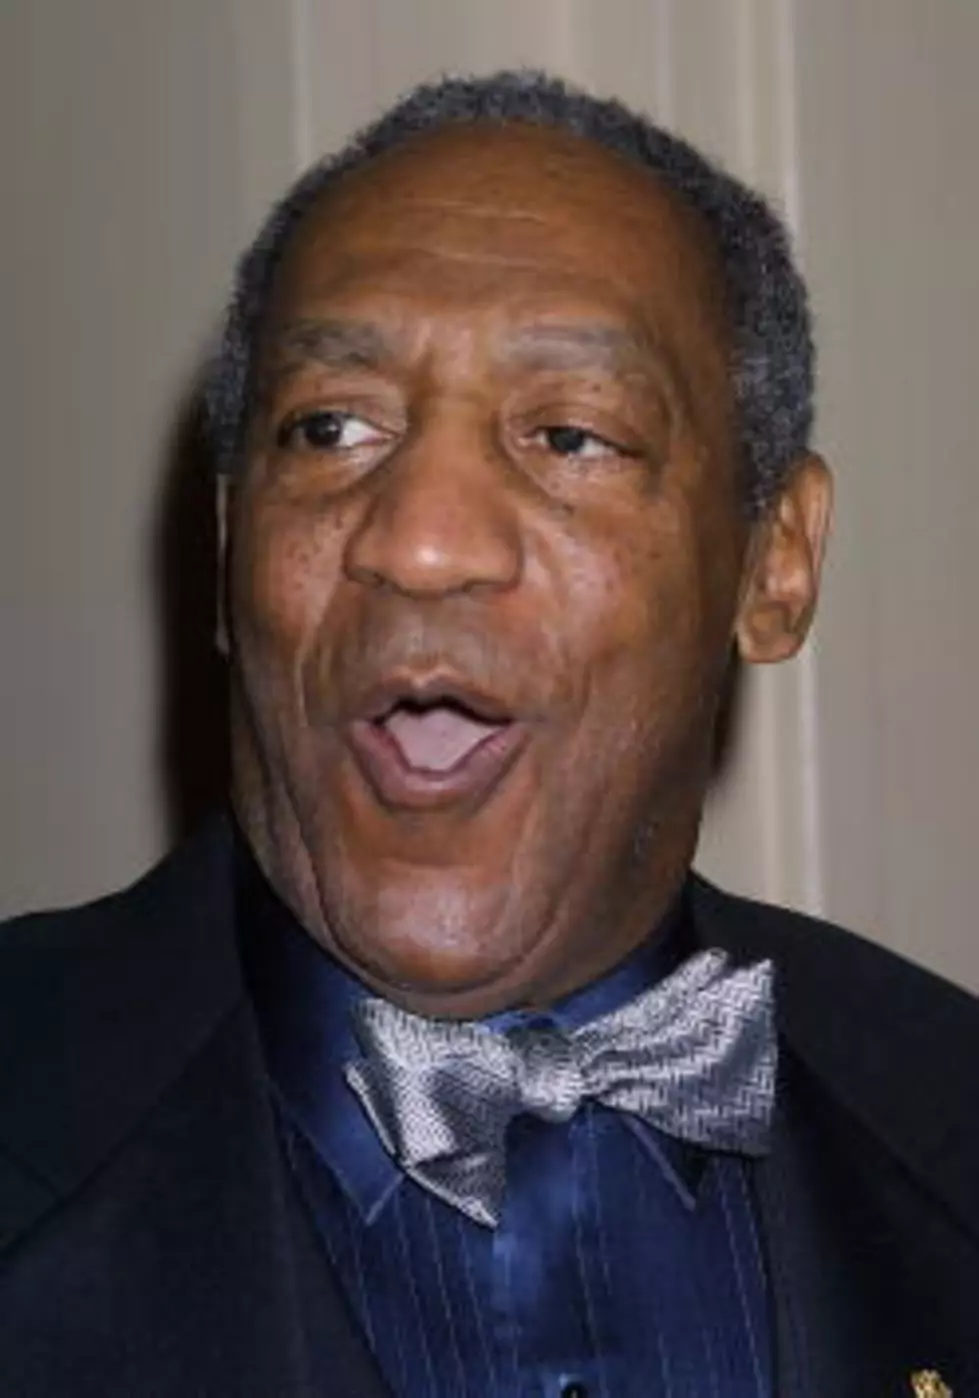 Cosby Responds To Rape Allegations (Video)